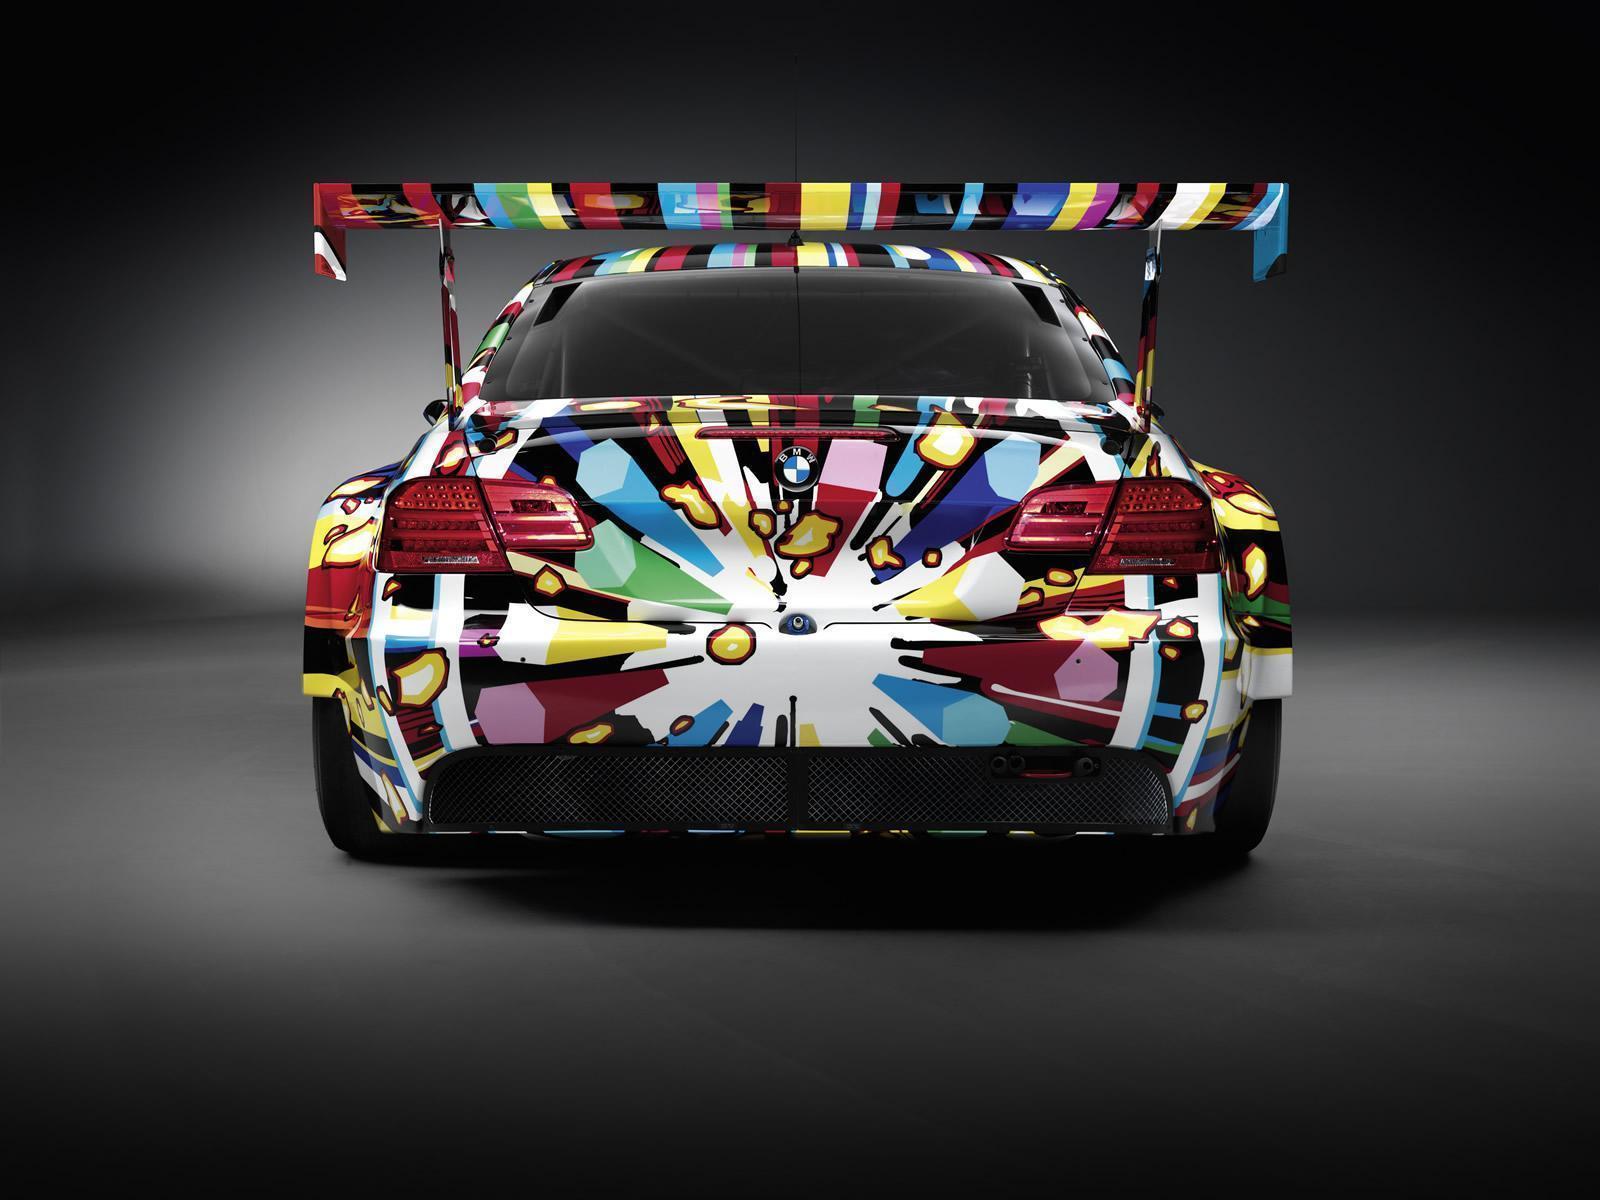 Jeff Koons Designed BMW Art Car 2010 Photo 59554 Picture At High